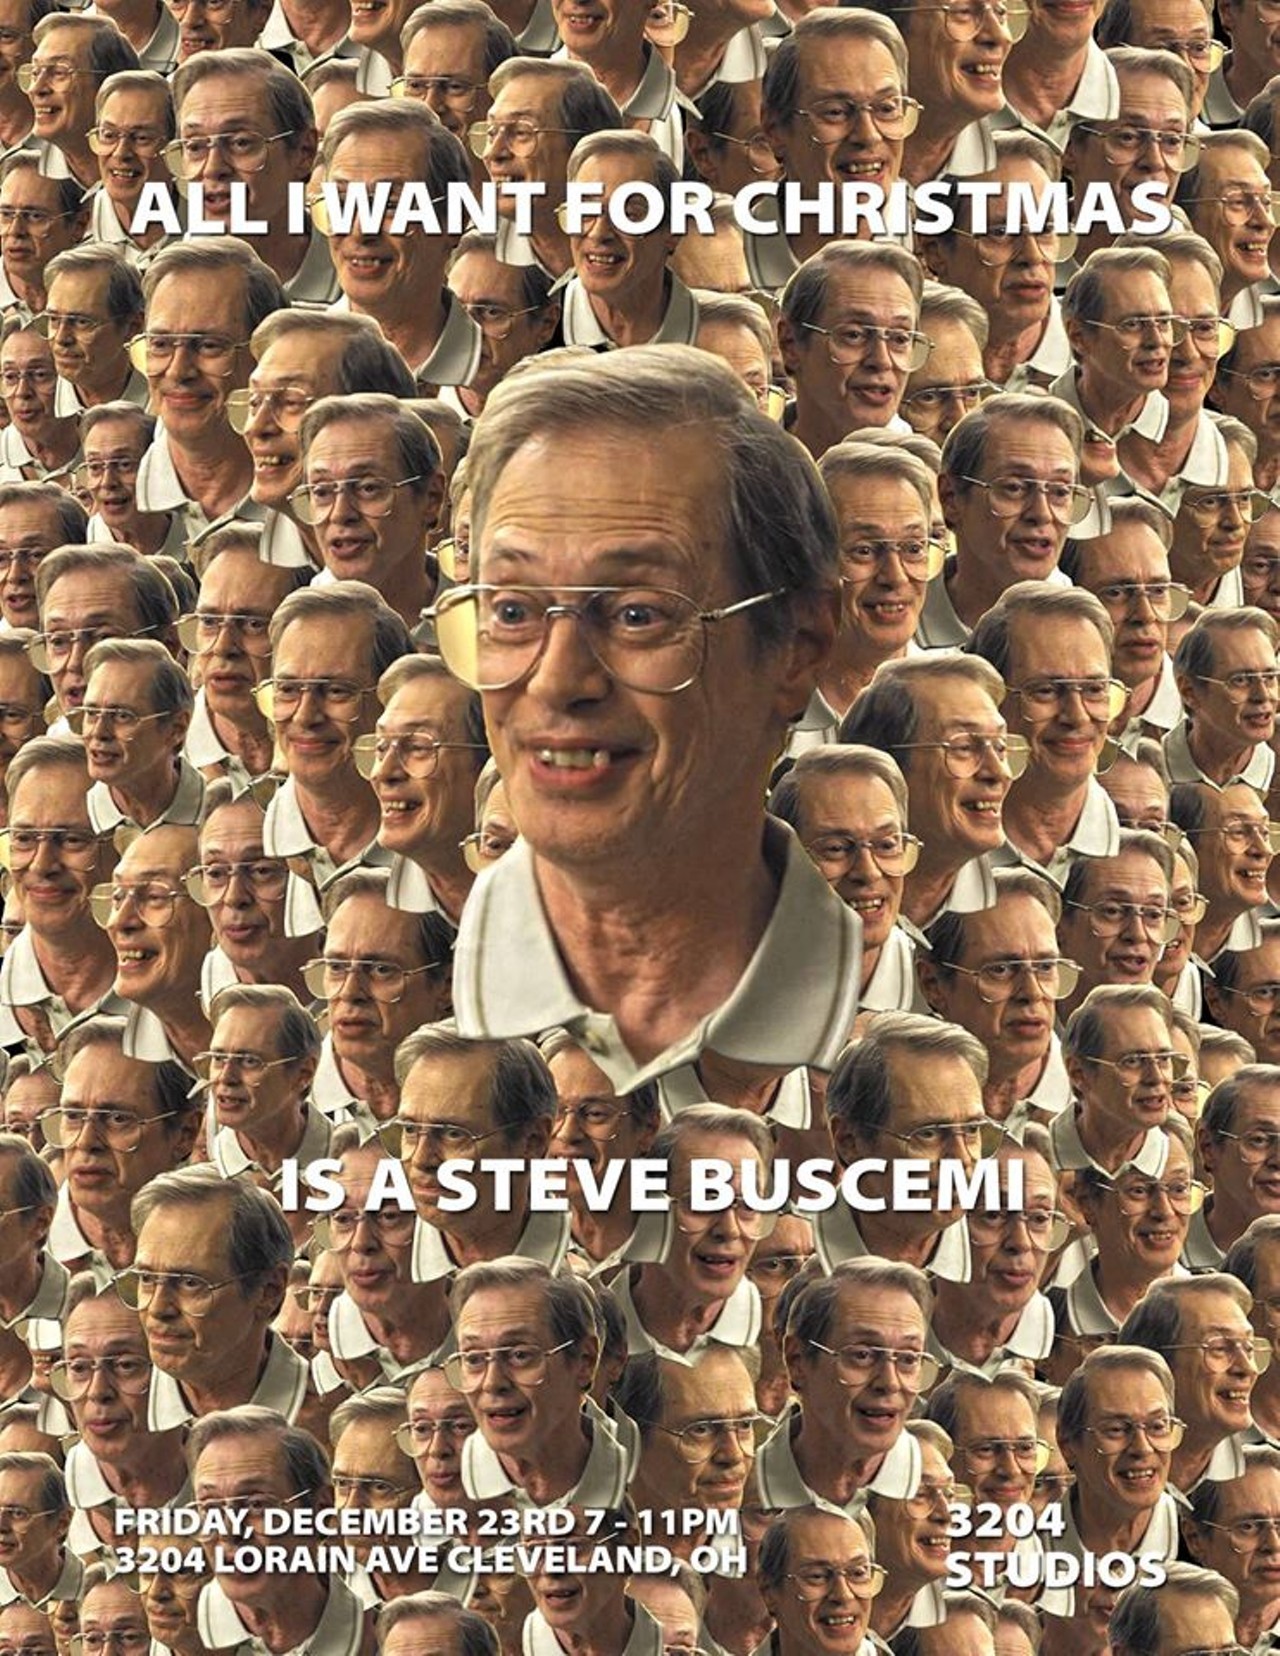 All I Want for Christmas is Steve Buscemi 
When: Fri., Dec. 23
All the artists of 3204 Studios want for Christmas this year is&#133;Steve Buscemi? That&#146;s right, the latest exhibition at 3204 Studios features original artwork inspired by firefighter-turned-actor Steve Buscemi. From 1980 to 1984, Buscemi served as a Manhattan Firefighter in the Little Italy section of New York City. The day after 9/11, Buscemi anonymously returned to help clear debris and search for survivors. For a week, he worked 12 hour shifts. So, what&#146;s not to love about this guy, right? This unique and slightly absurd exhibition is the latest in a series of unlikely themed exhibitions that 3204 Studios has hosted. All I Want for Christmas is Steve Buscemi opens with a reception from 7 p.m. to 11 p.m. today, just in time for last minute holiday shoppers looking for a perfectly odd holiday gift. Admission is free. (Photo courtesy 3204 Studios)